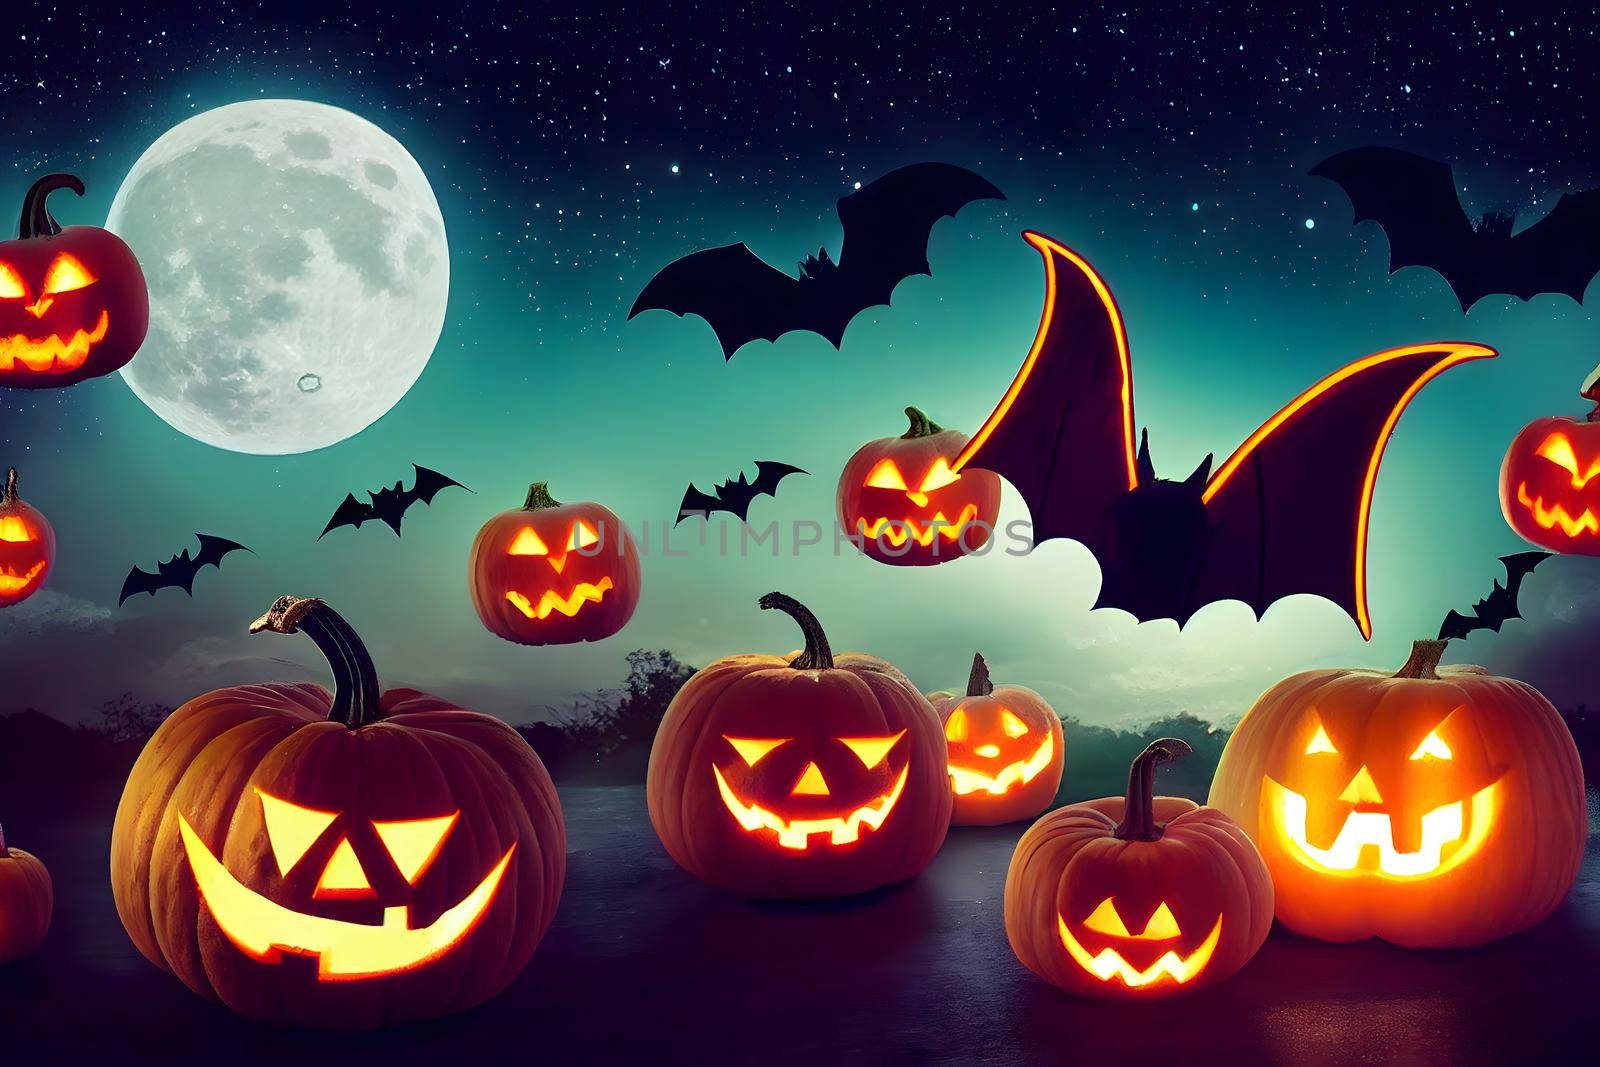 halloween aesthetic background, bats, pumpkins, full moon and stars night, neural network generated art by z1b